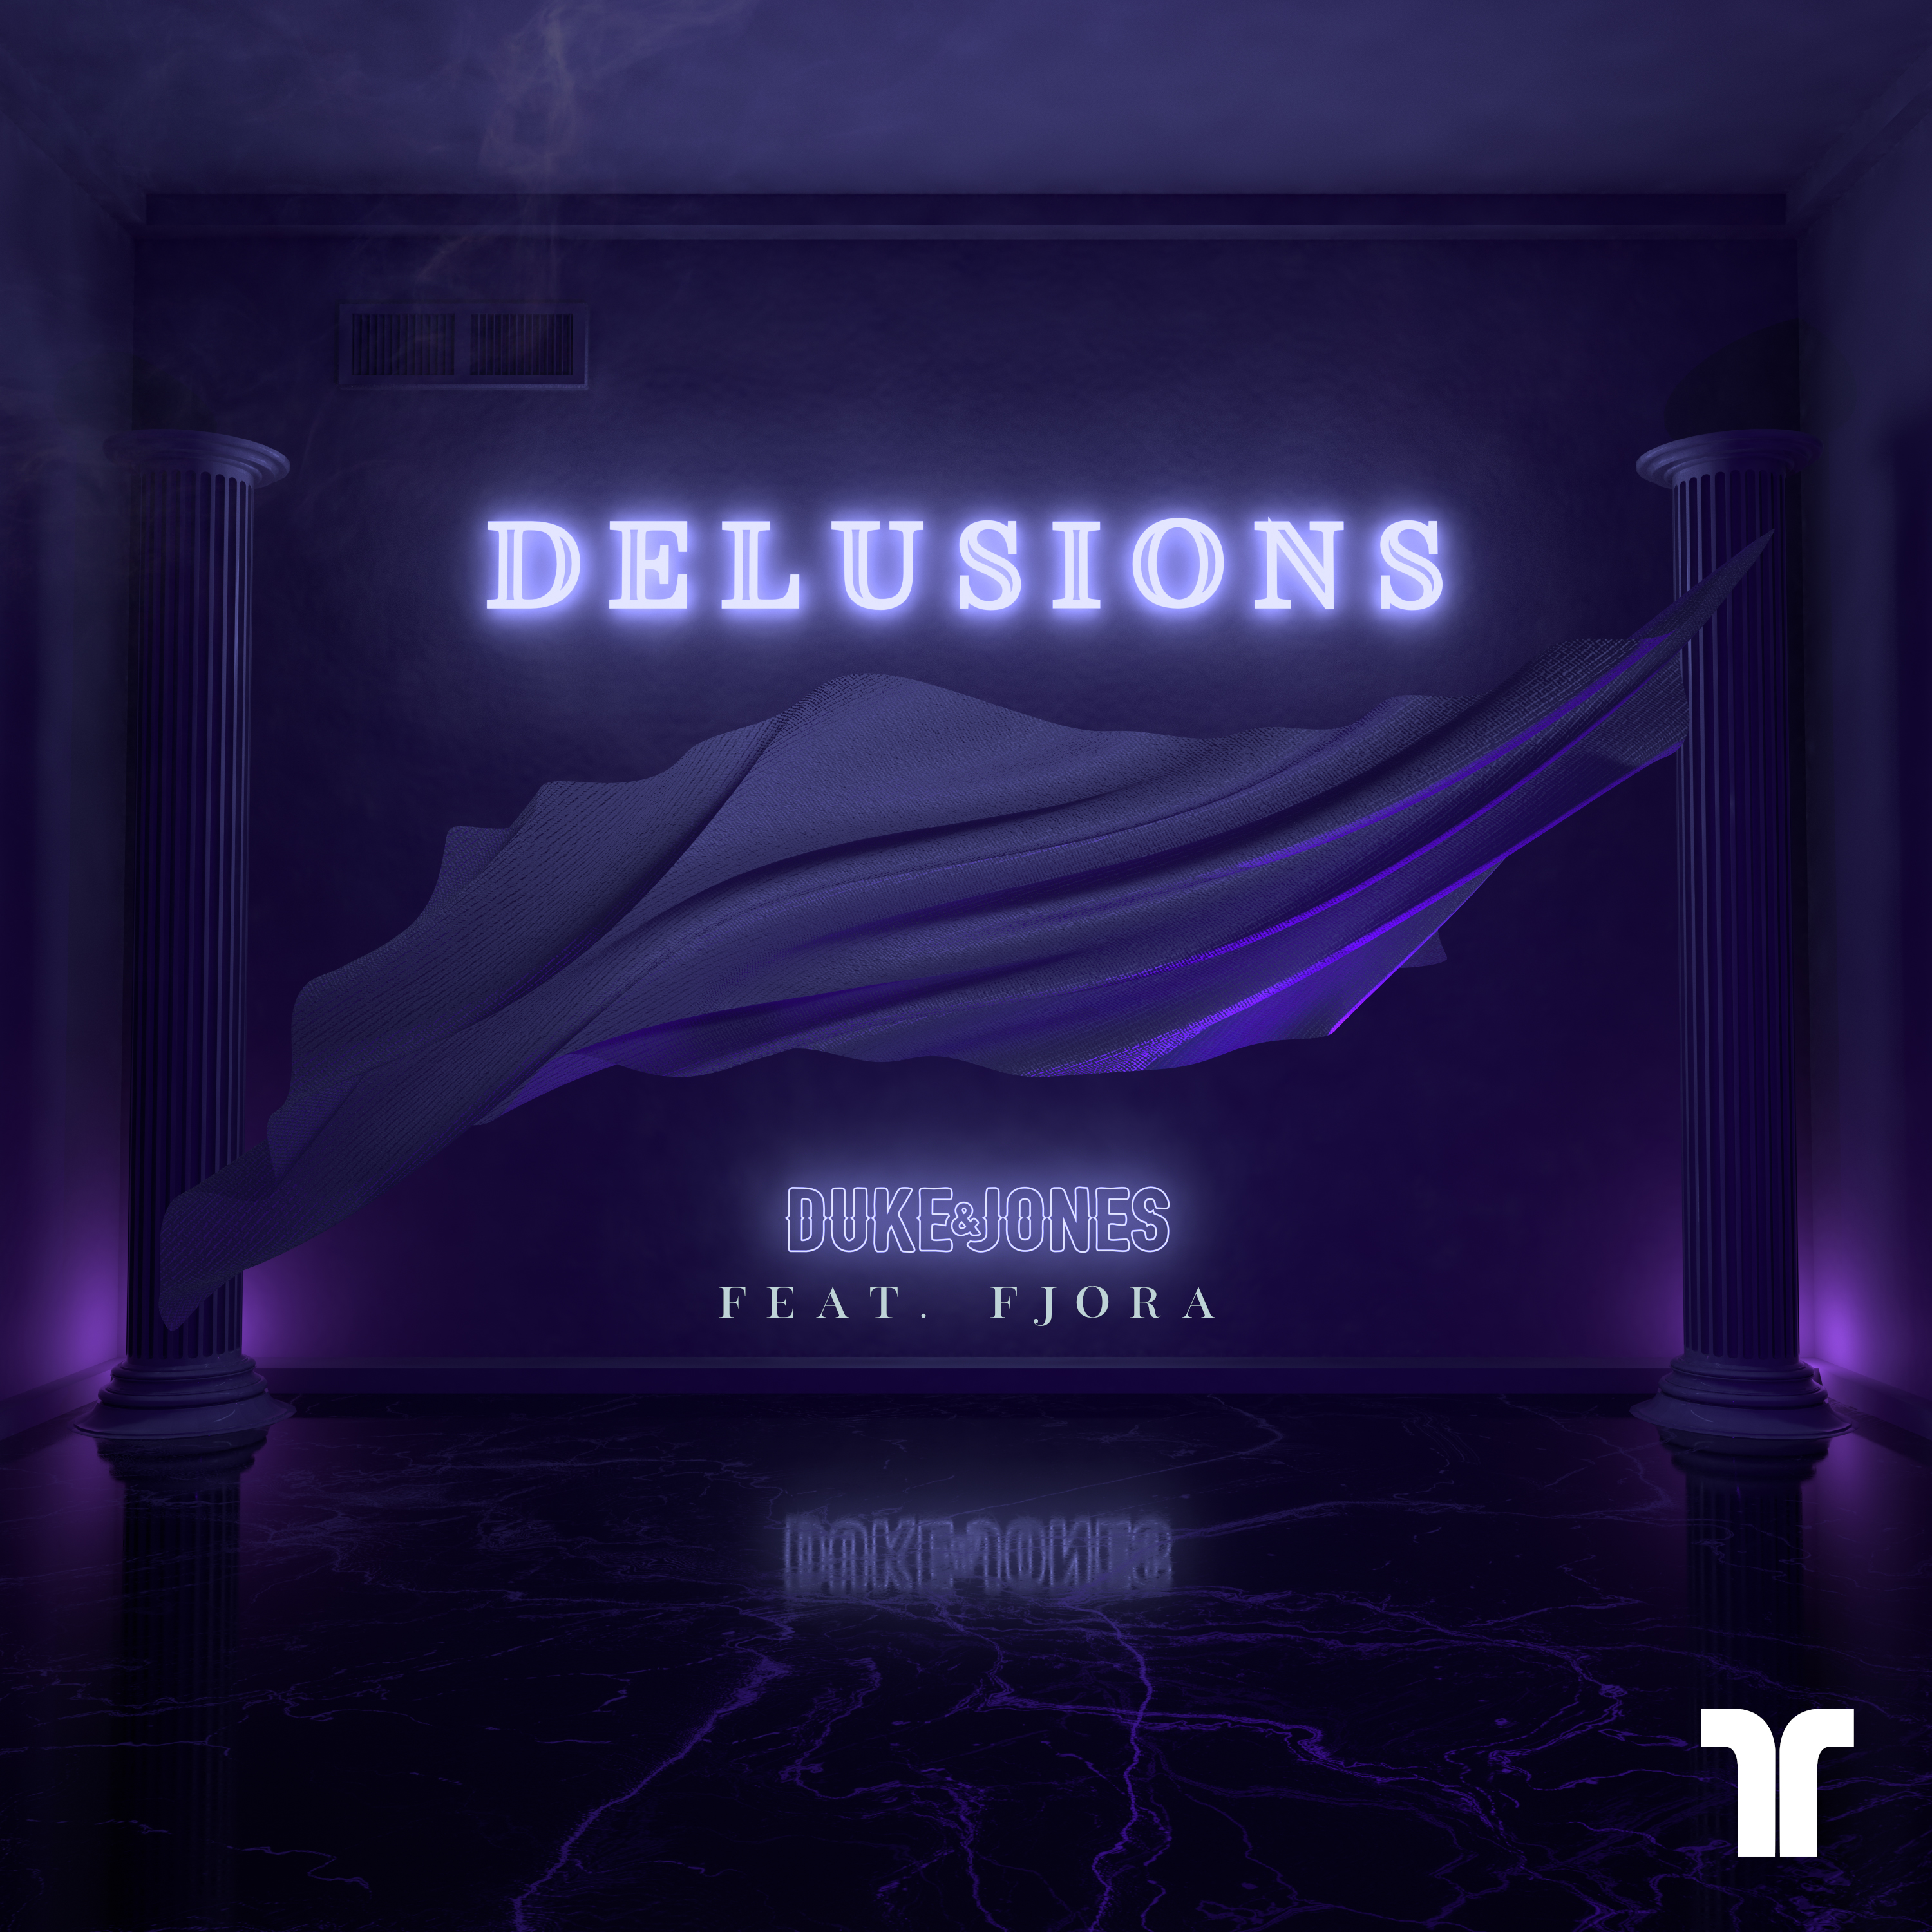 Duke And Jones Drop Thrive Records Release “Delusions”